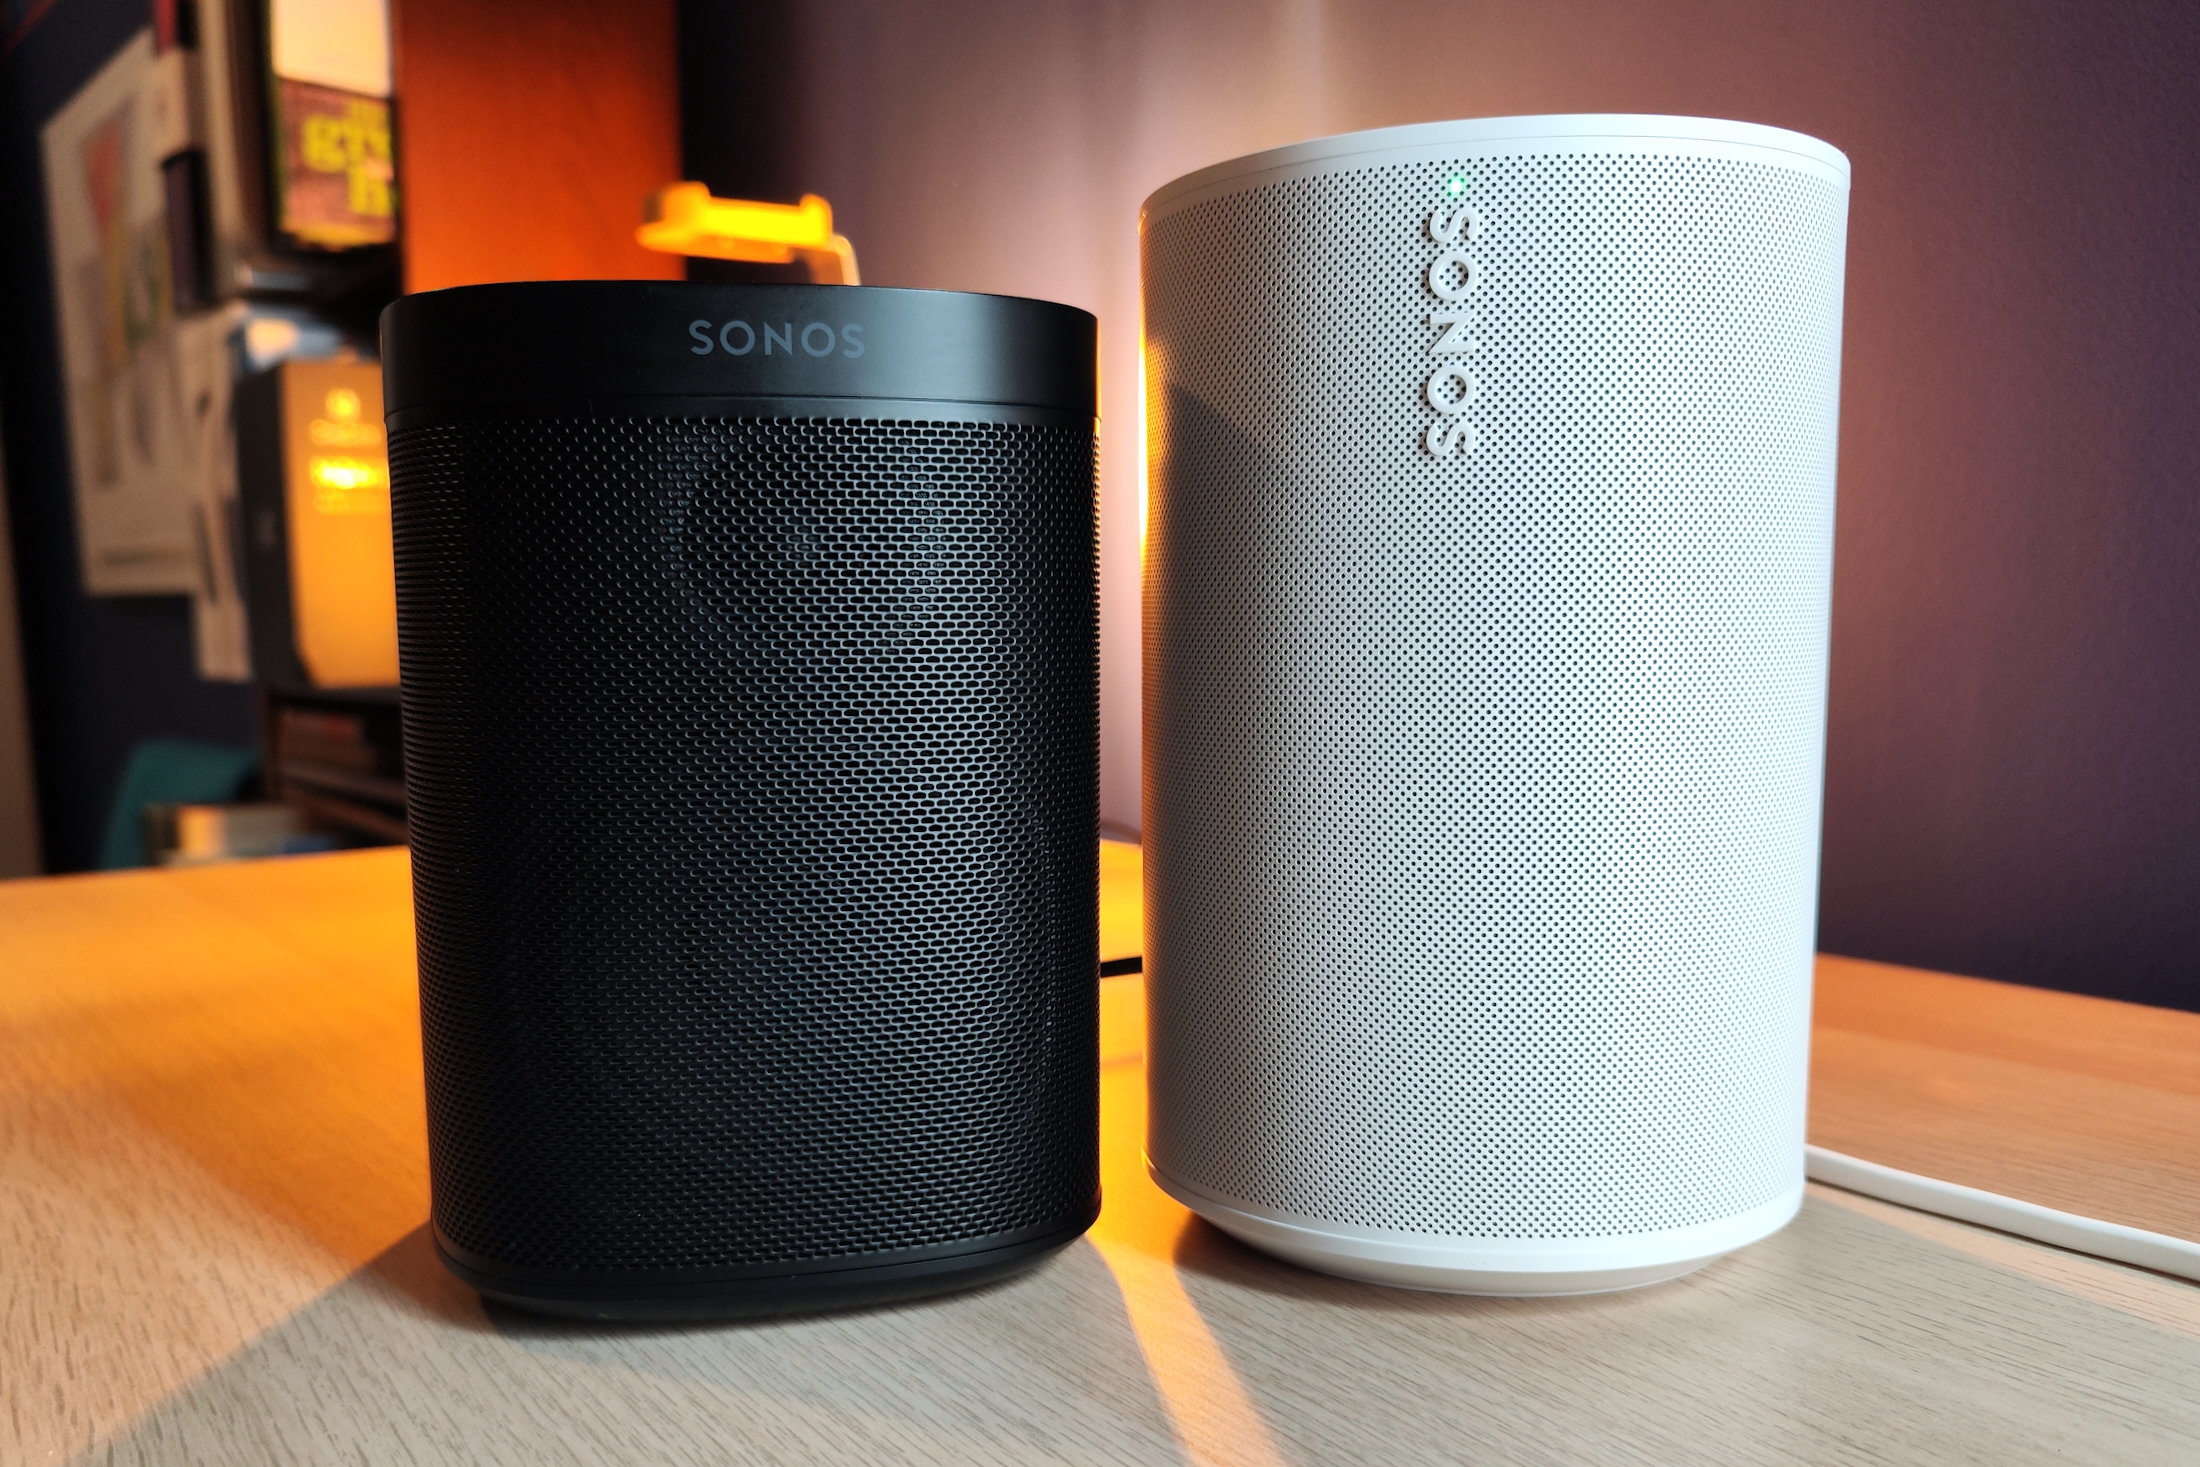 Vijftig Hobart Tussendoortje Sonos problems? A new Wi-Fi router might be the answer | Digital Trends